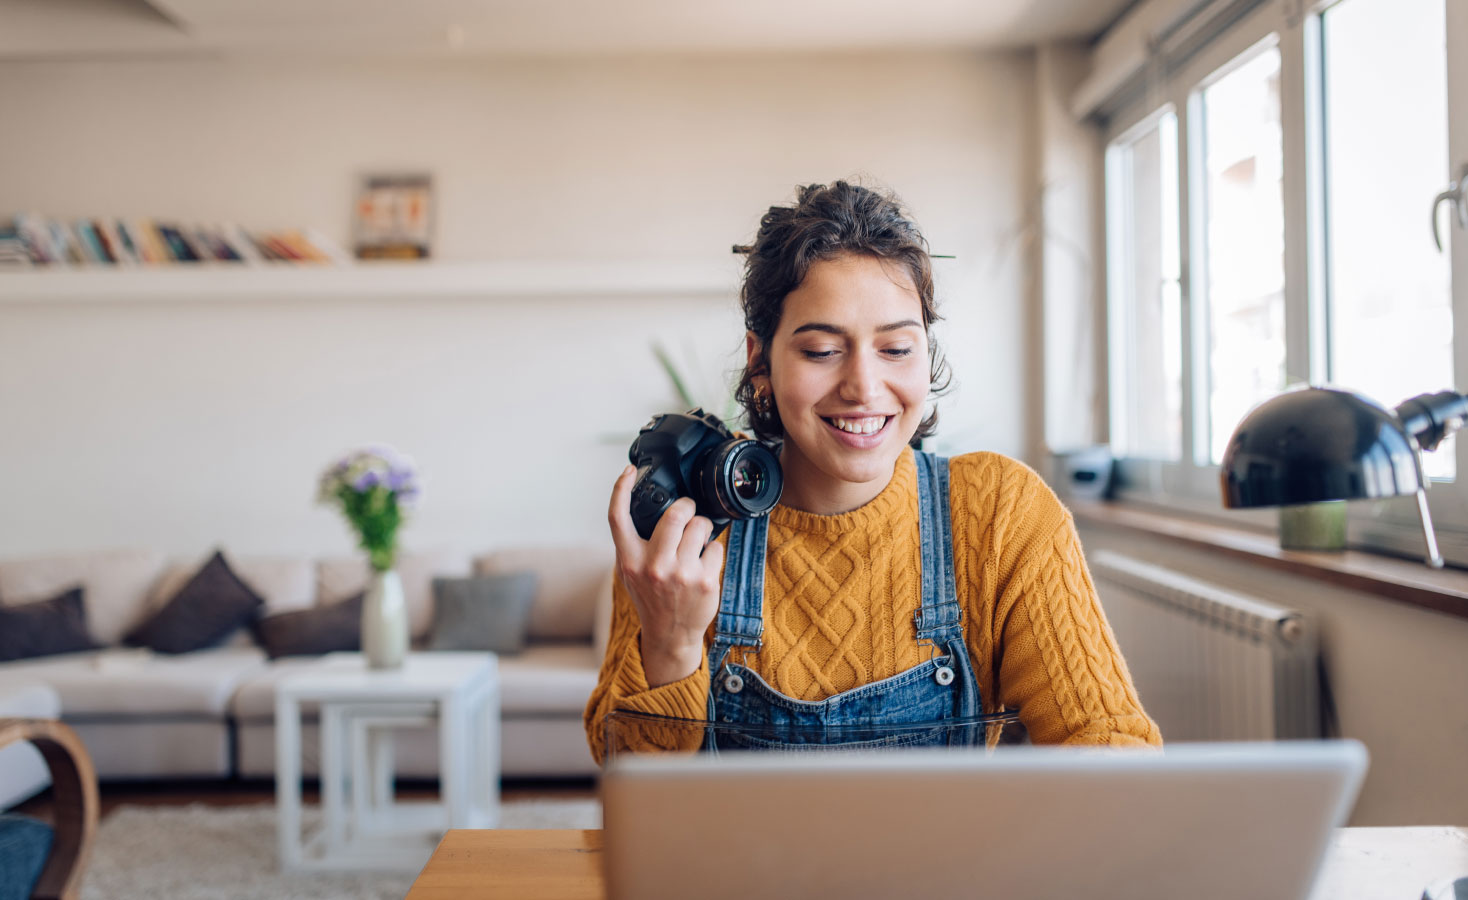 A young woman sells stock images online to see if she can profit from one of her passive income ideas.